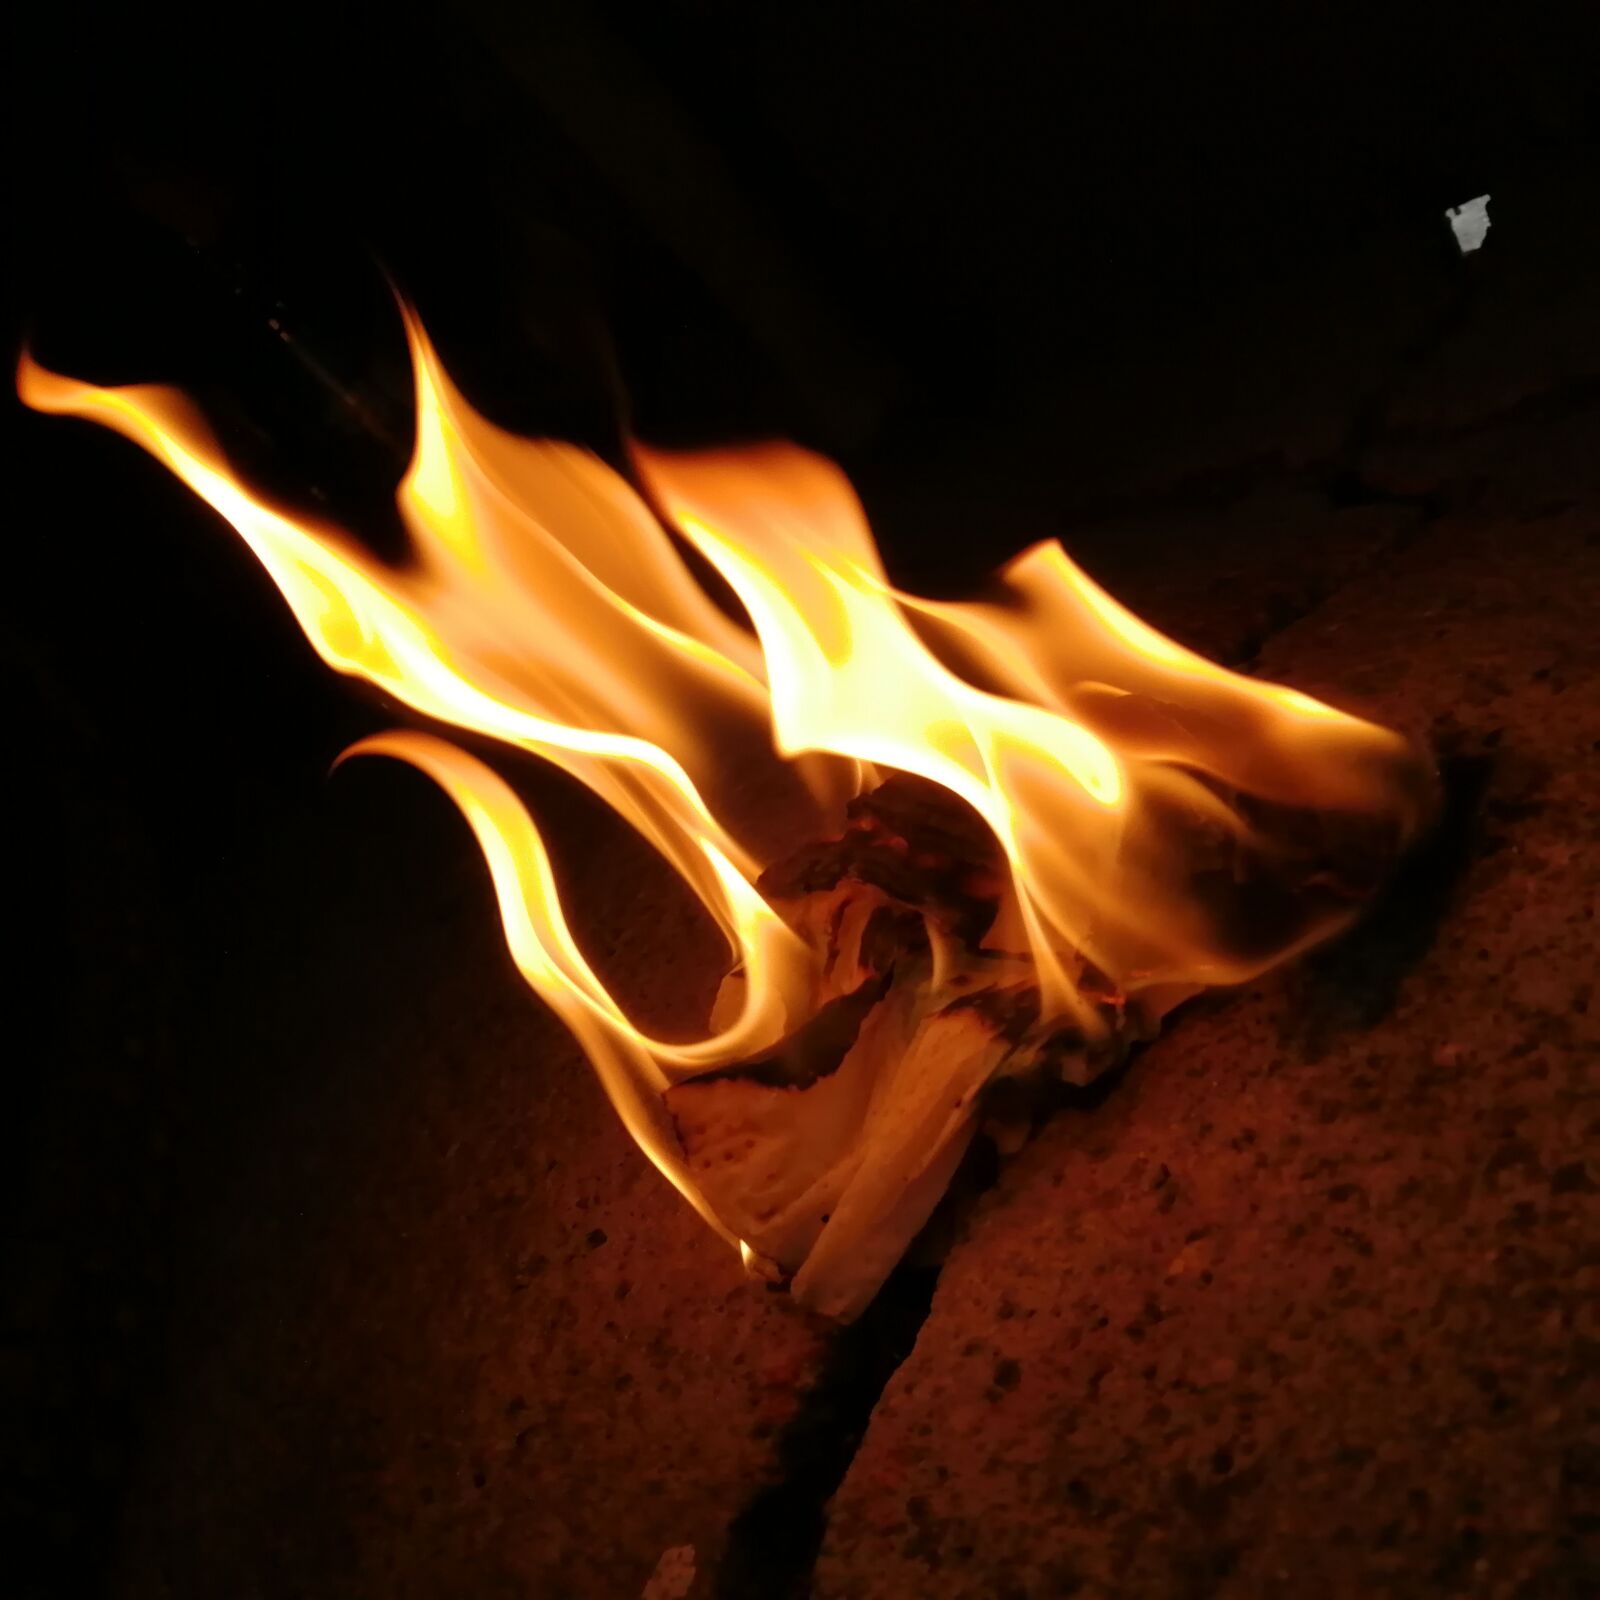 HUAWEI P SMART 2019 sample photo. Fire, image, red photography